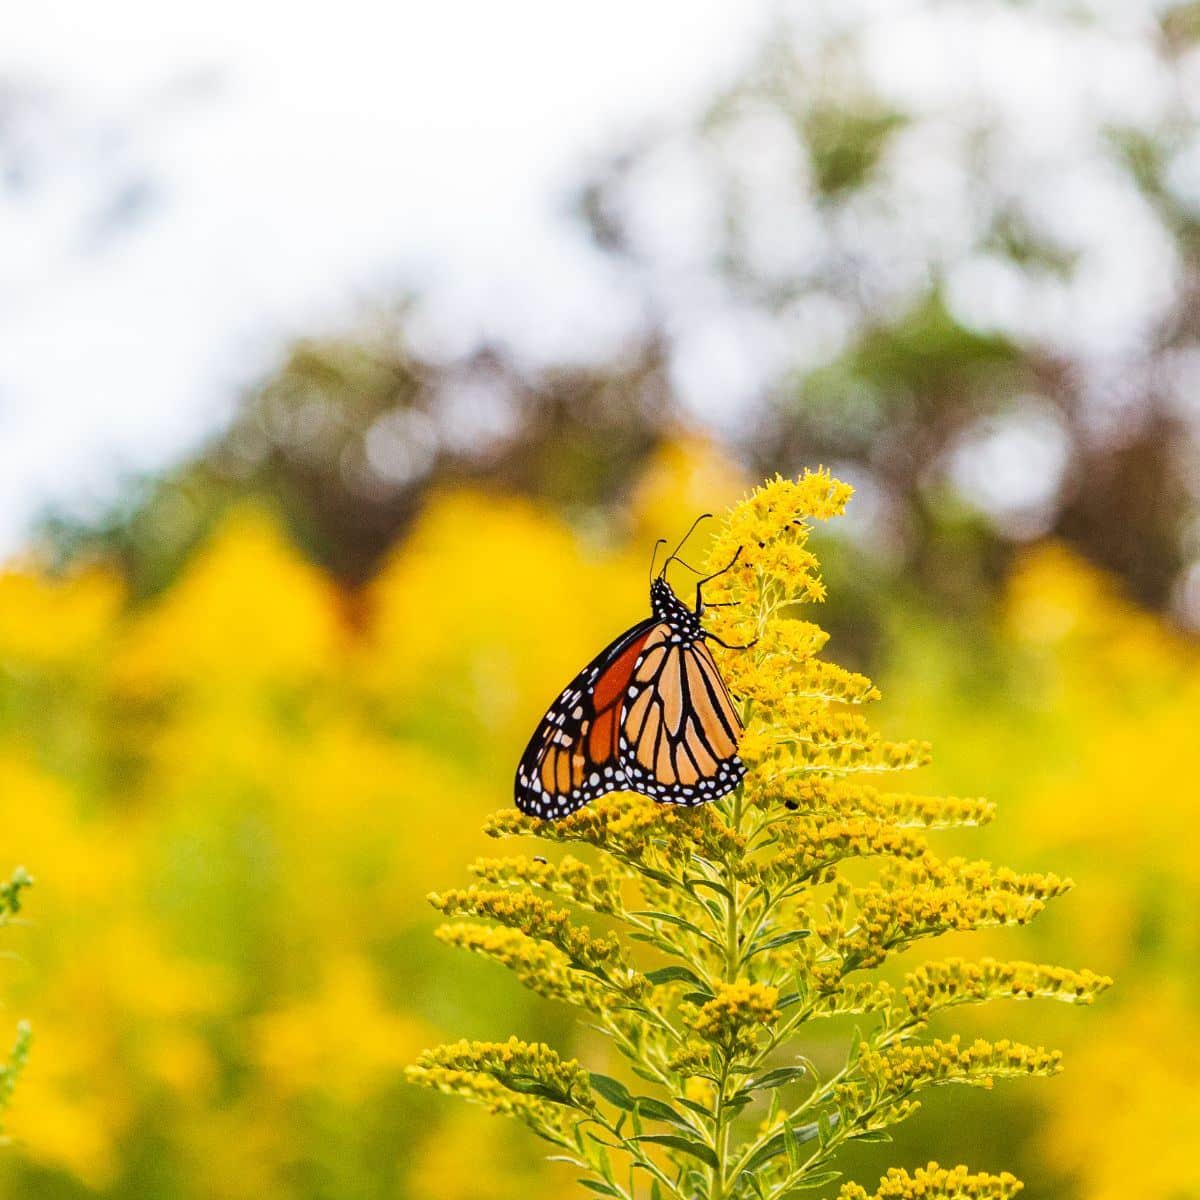 What is the spiritual meaning of yellow and black butterflies